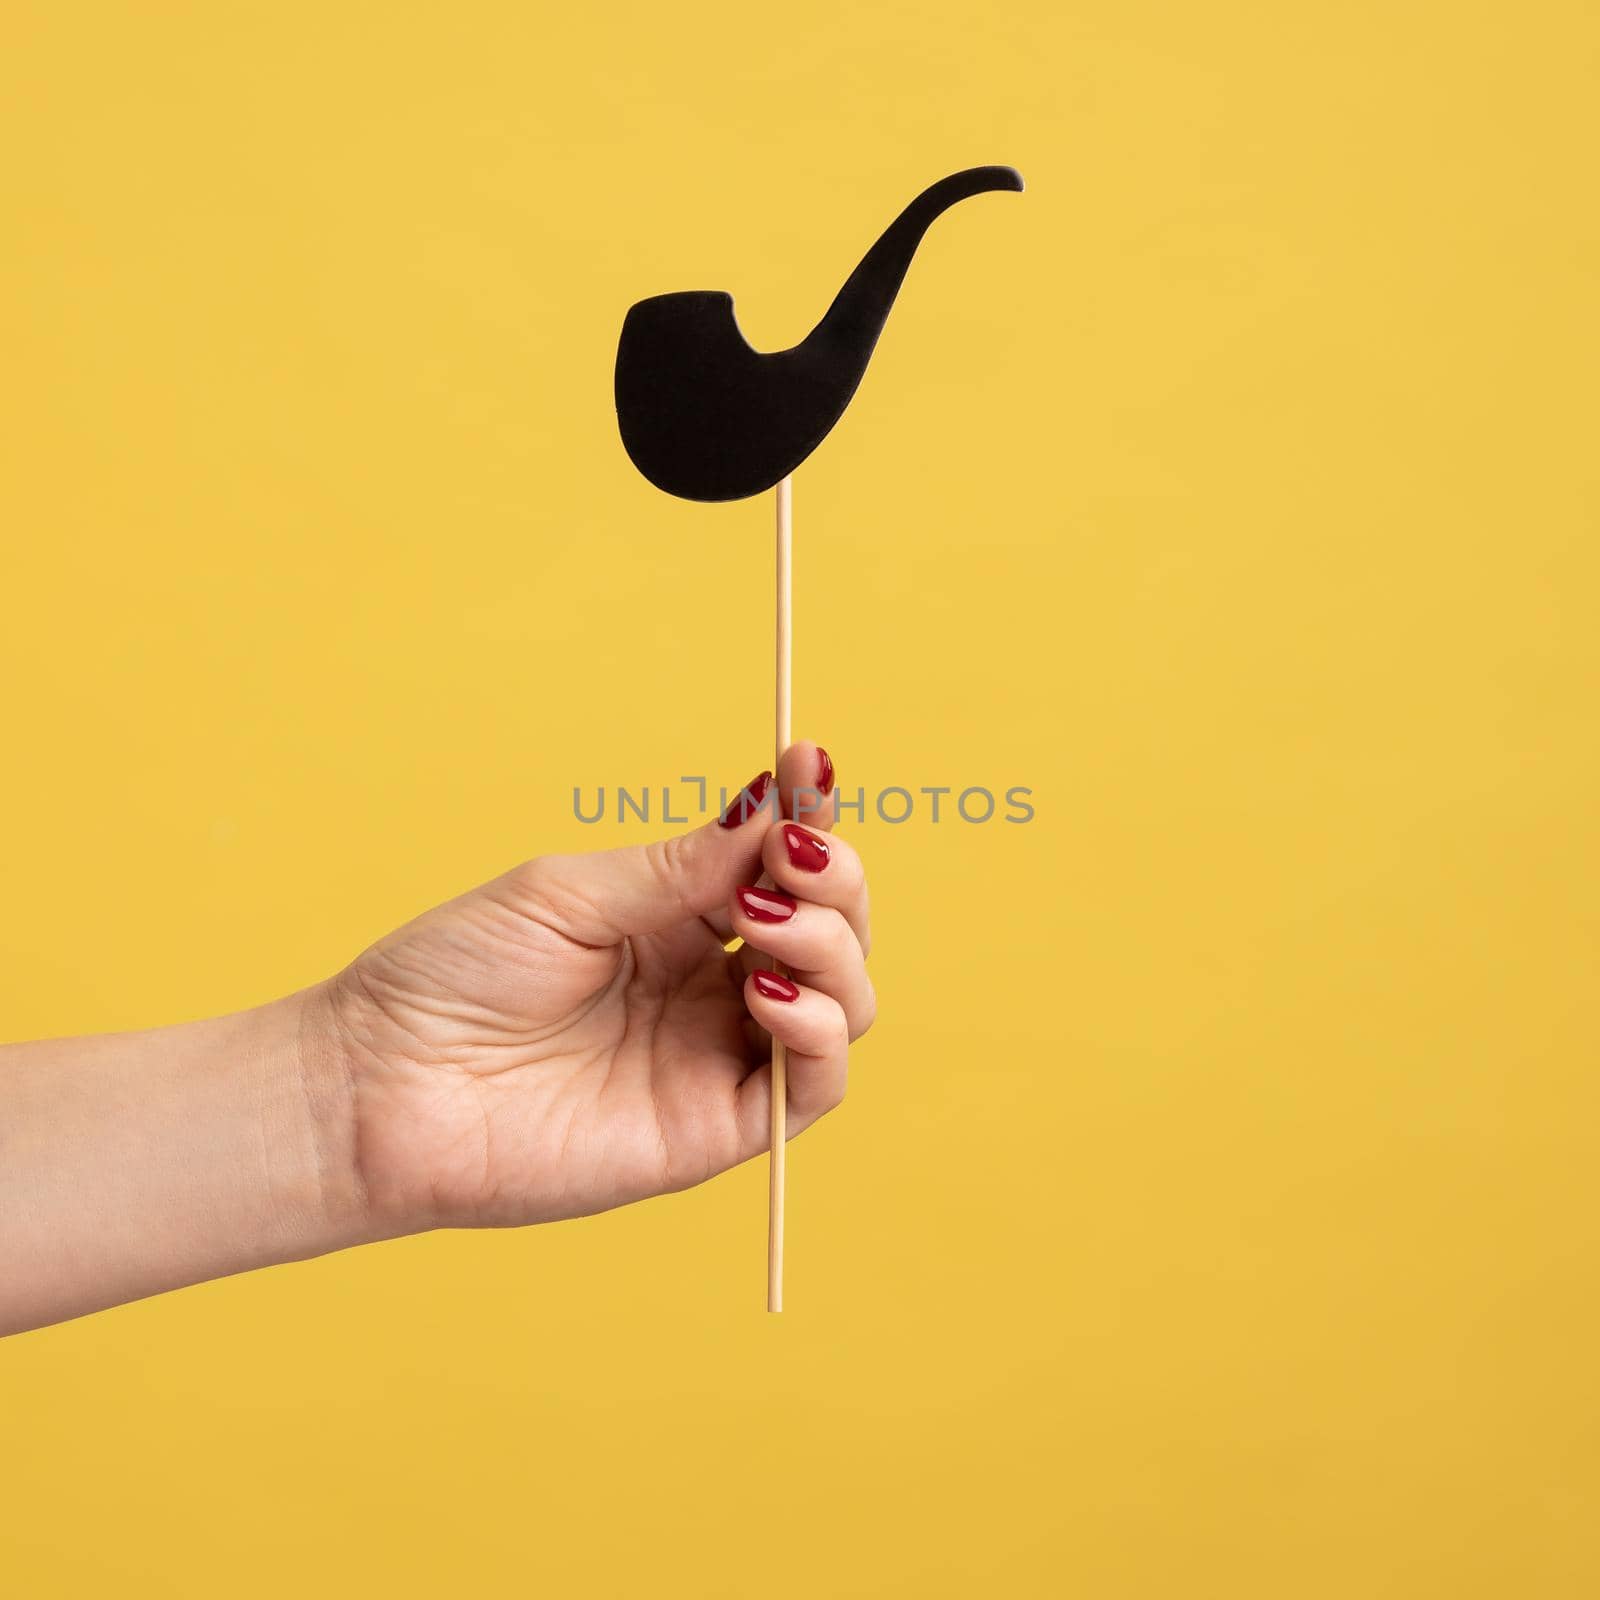 Closeup side view portrait of woman hand holding festive party props, black paper pipe on stick, celebrating holiday. Indoor studio shot isolated on yellow background.